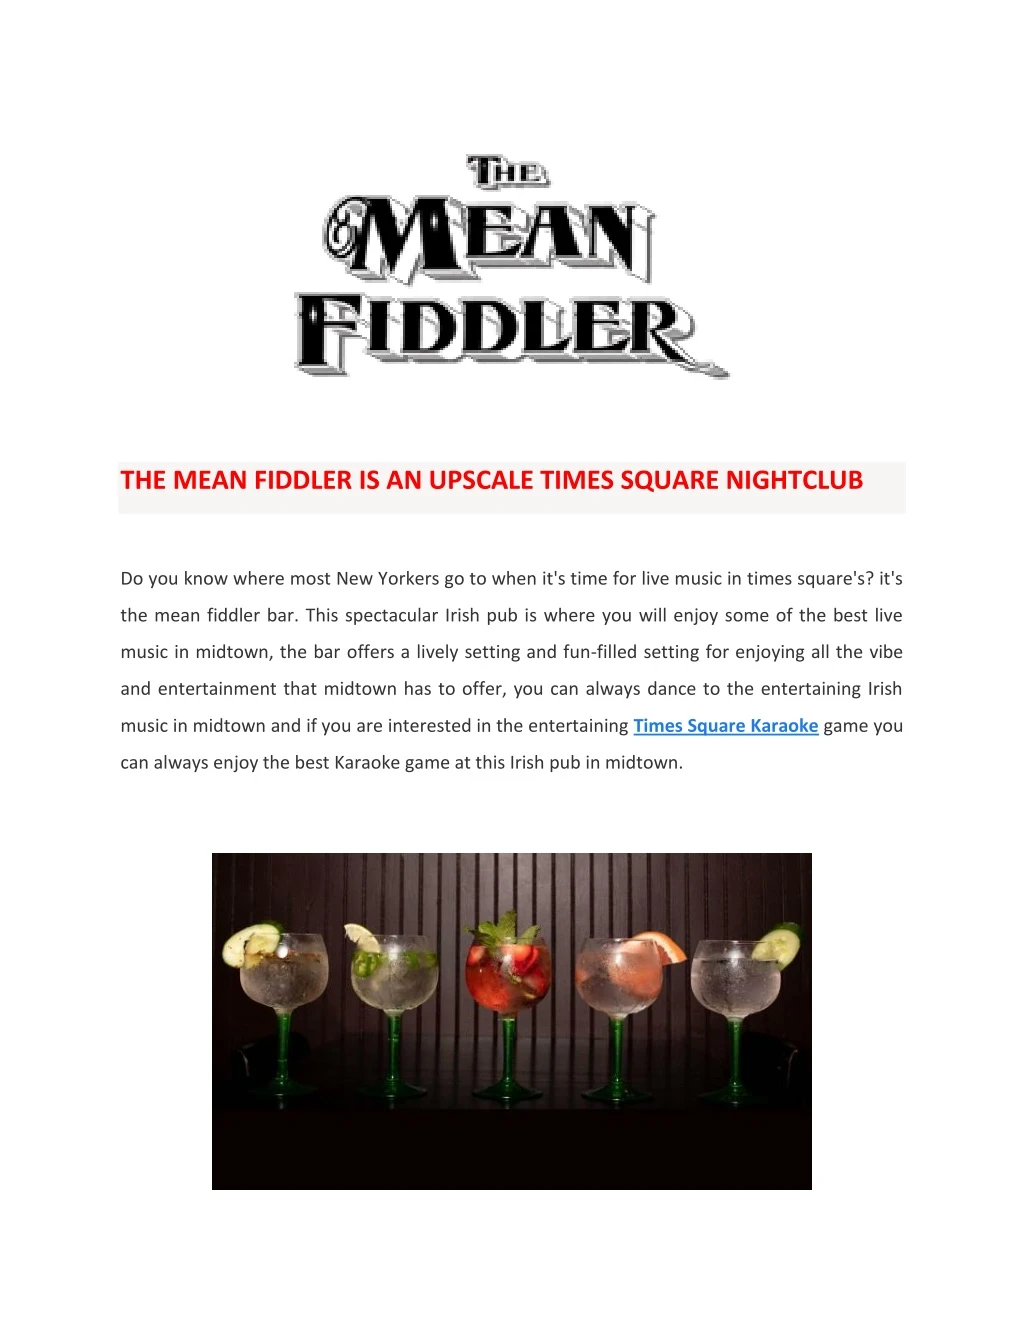 the mean fiddler is an upscale times square